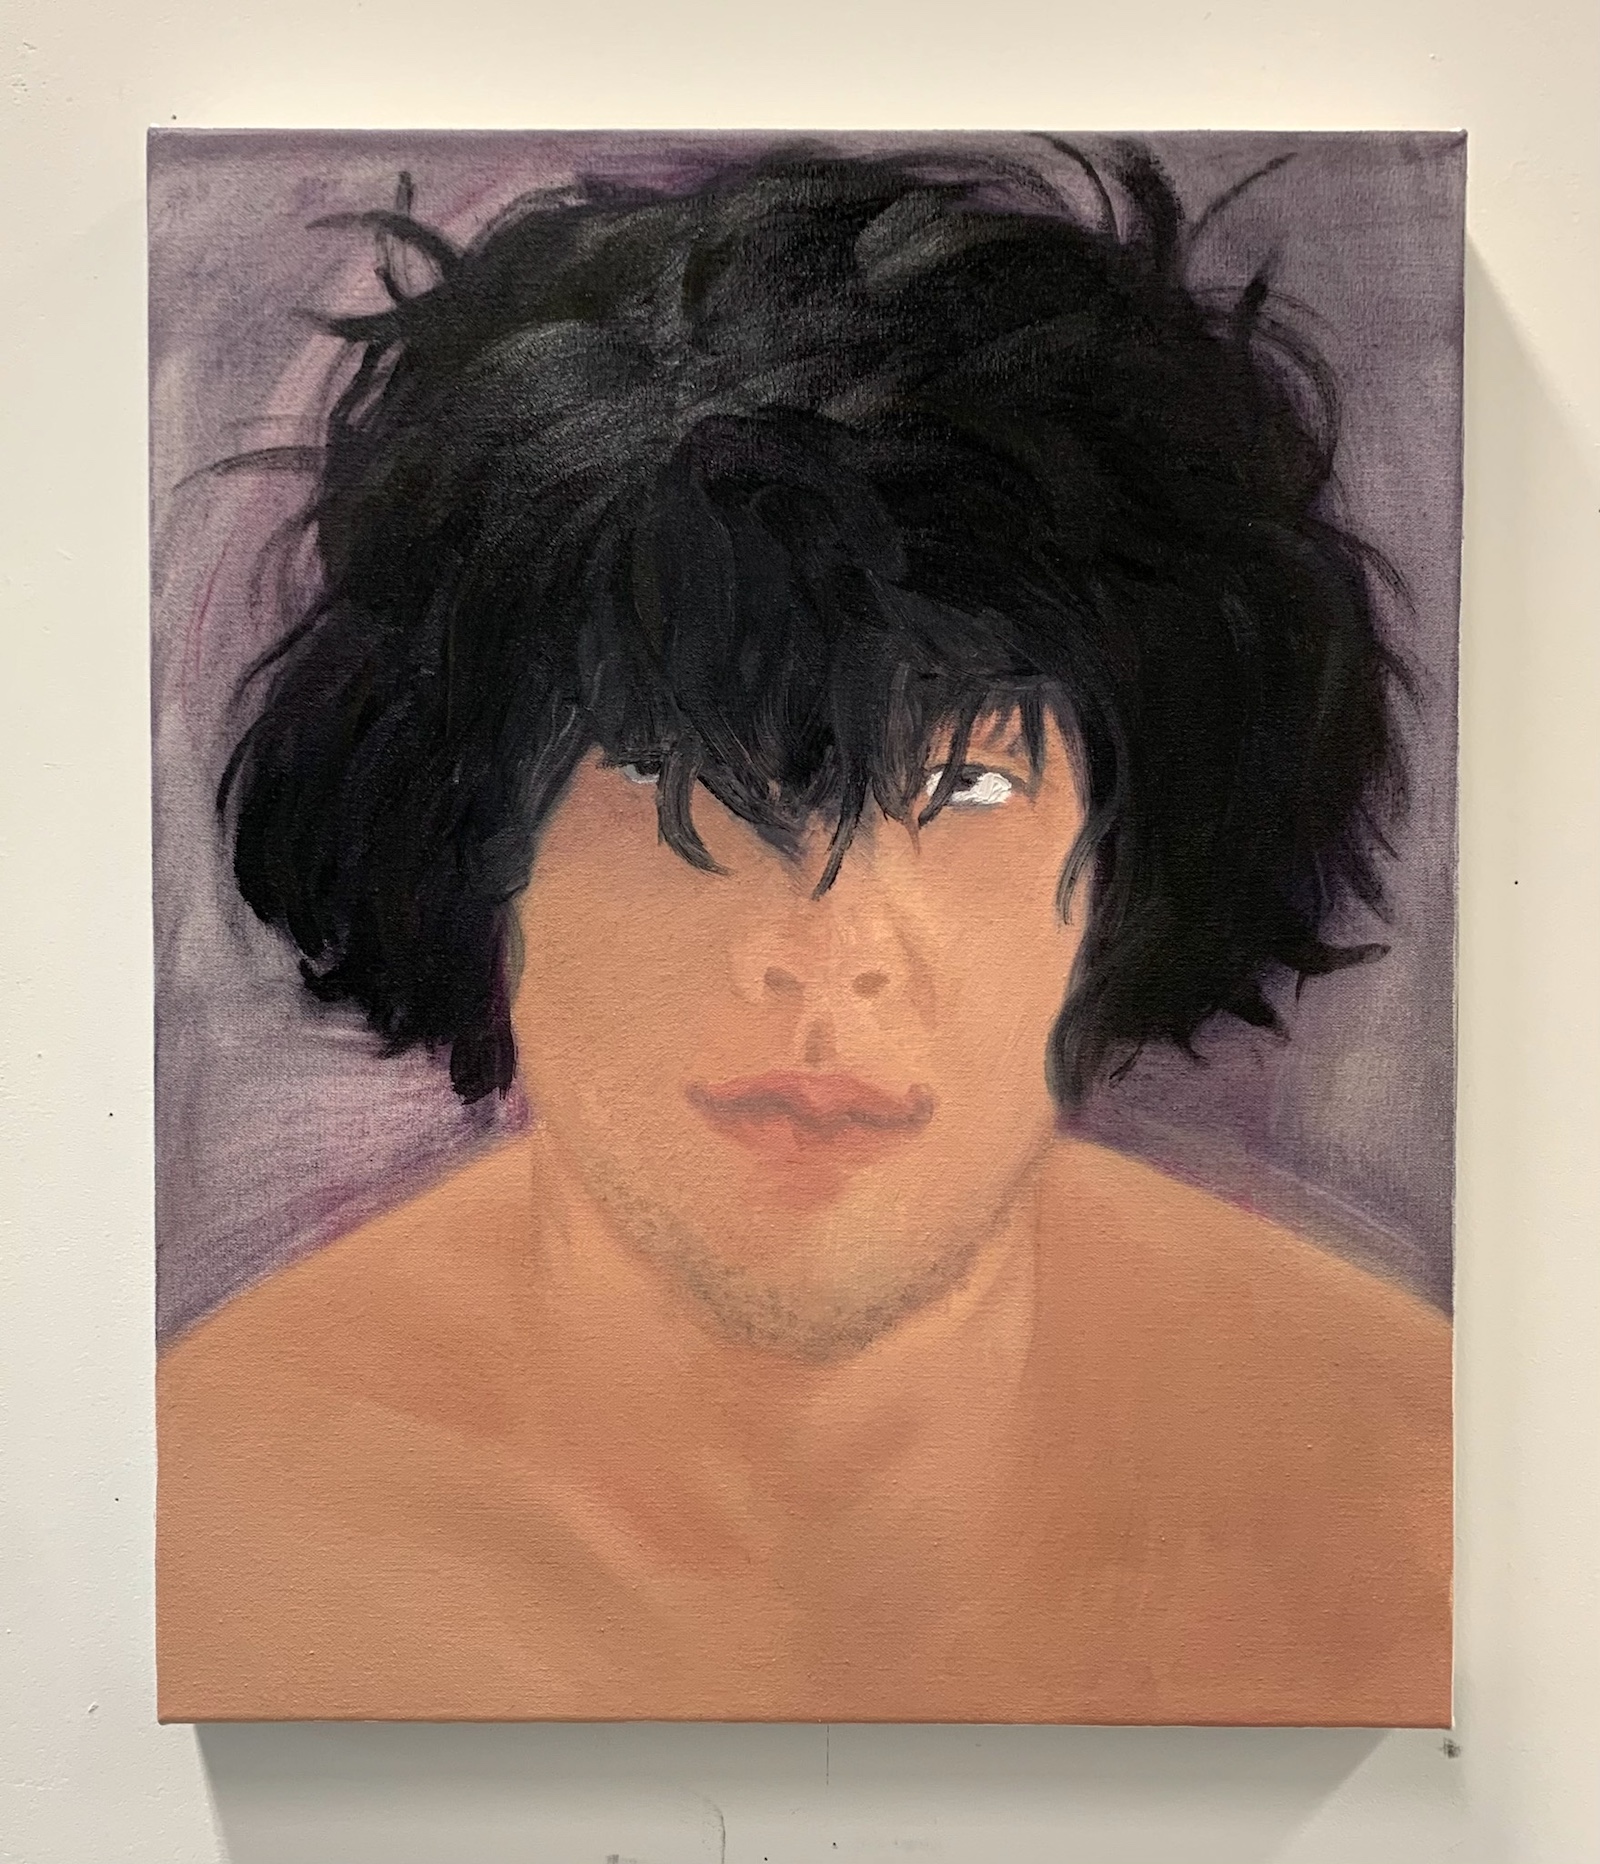 A portrait painting of a man with shaggy hair